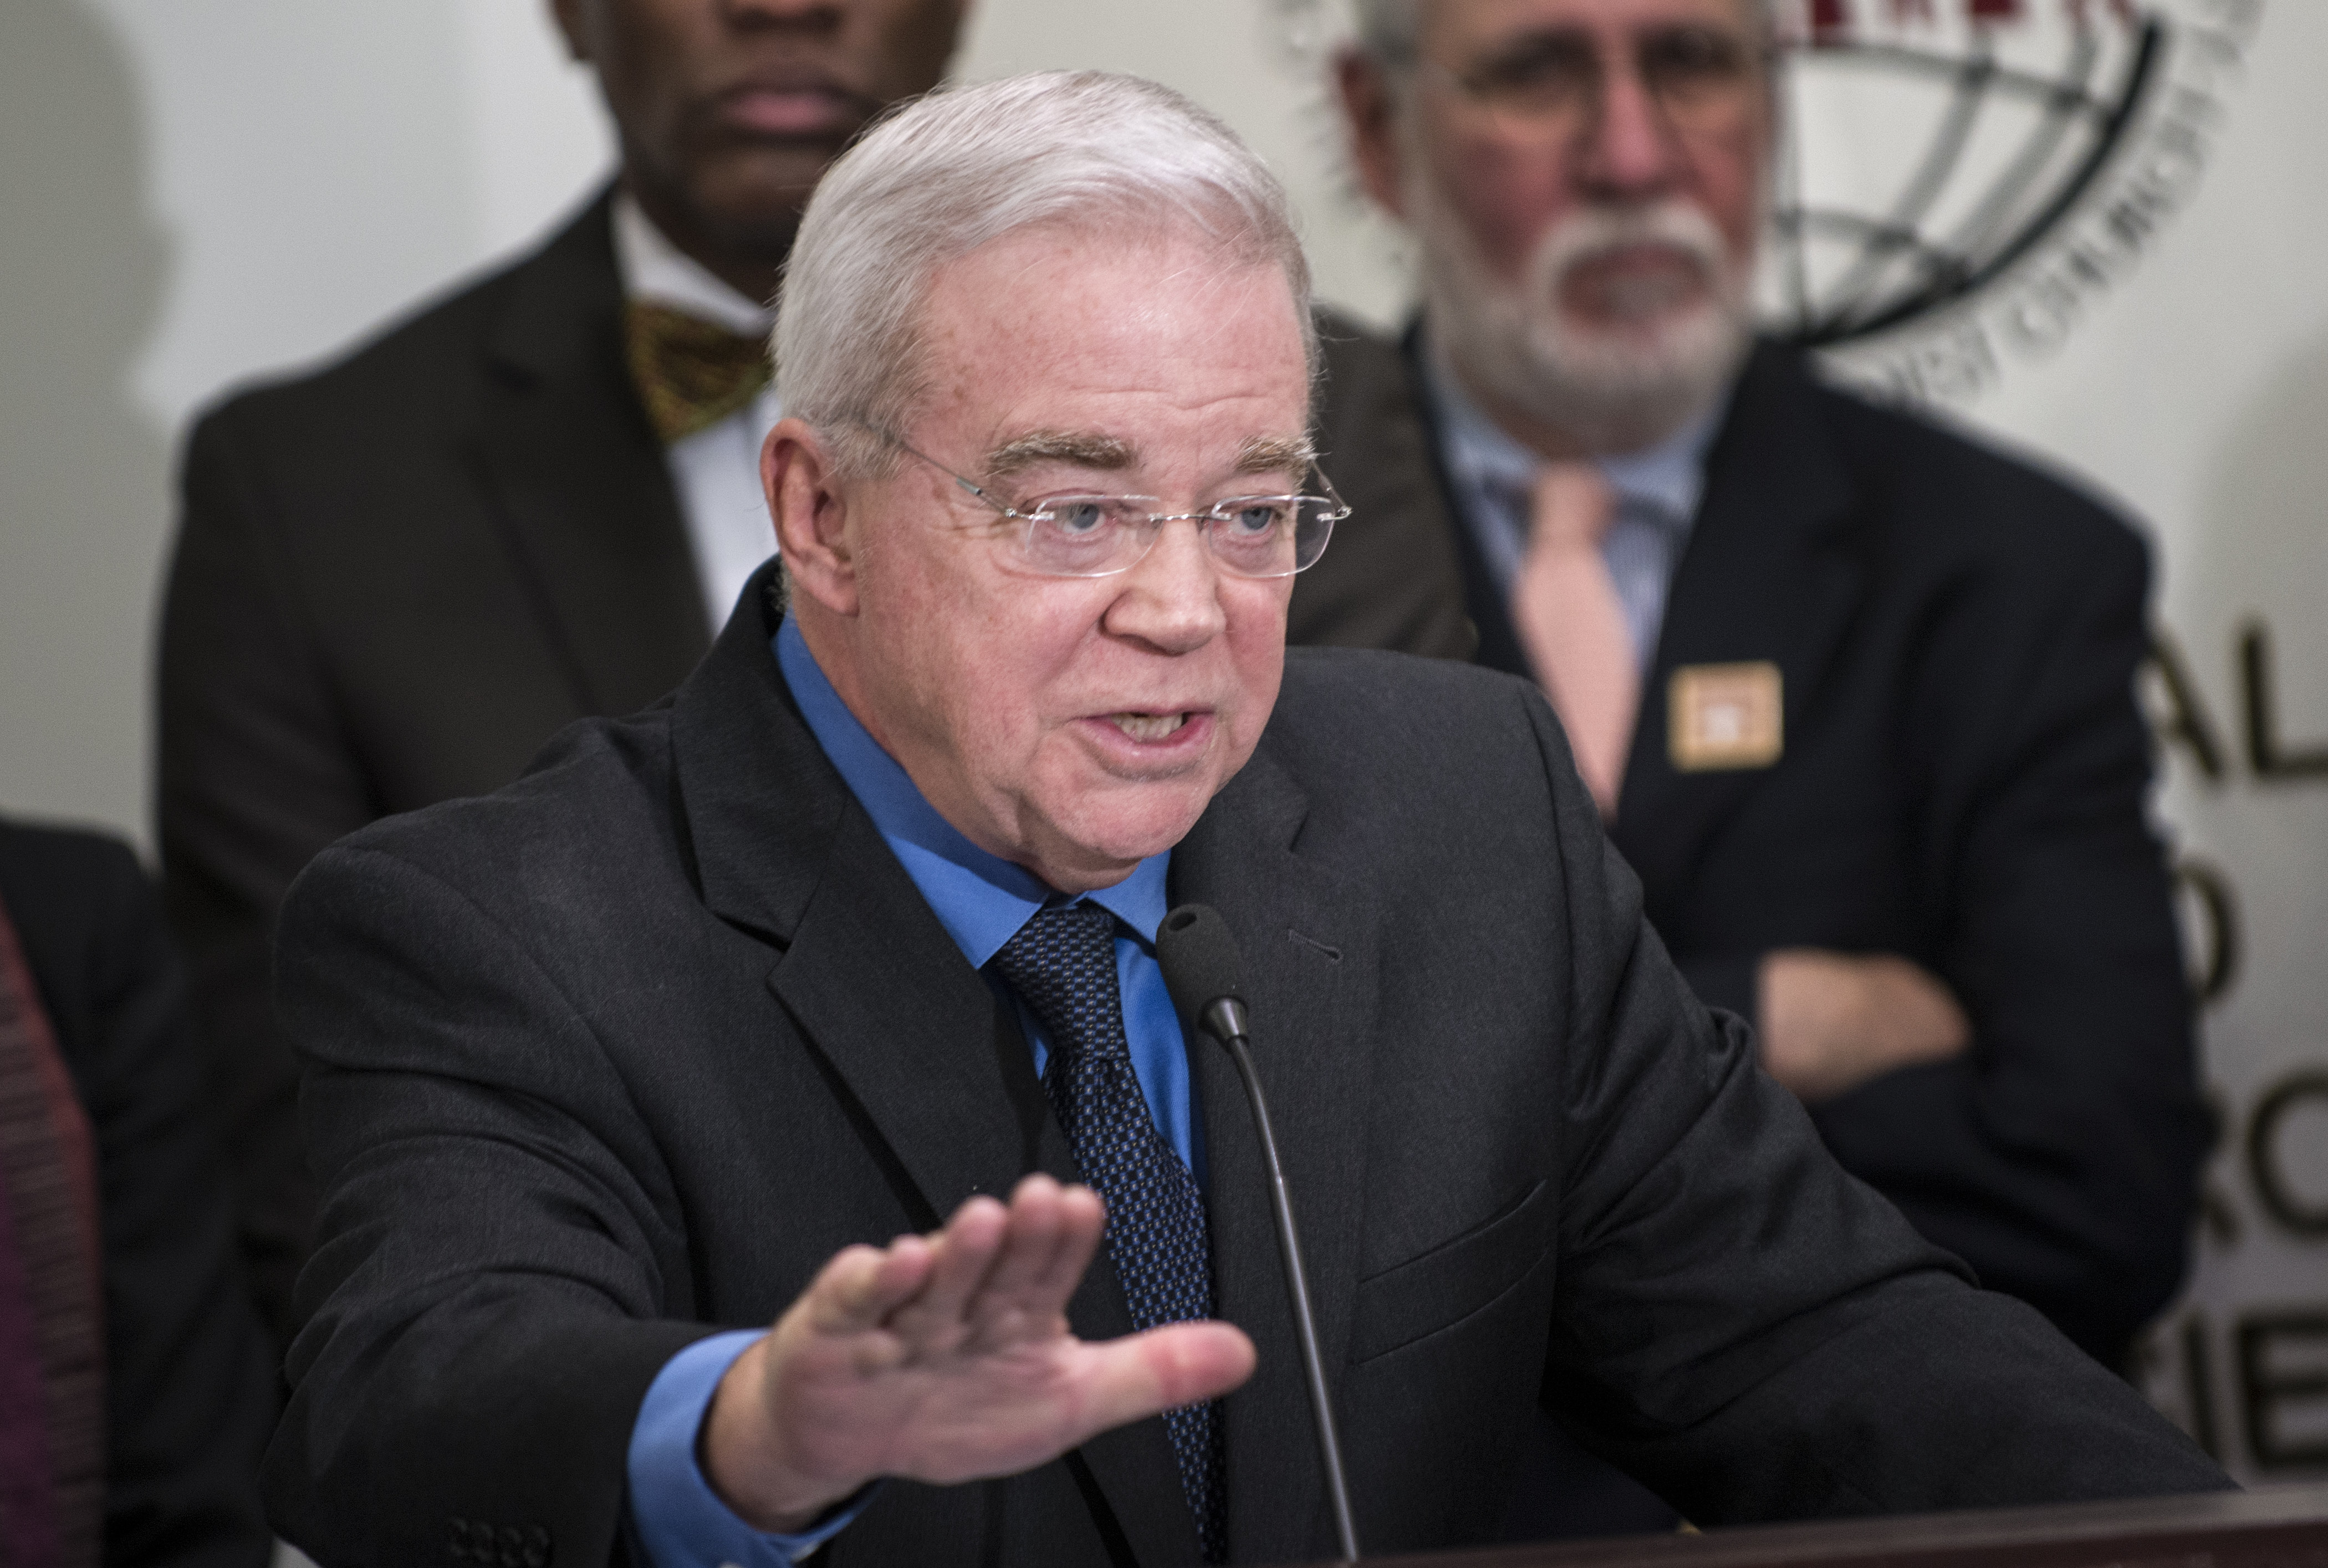 Jim Wallis, president and CEO of Sojourners, speaks during a press conference at the United Methodist Building in Washington, D.C., on Jan. 15, 2013. (Brendan Smialowski—AFP/Getty Images)